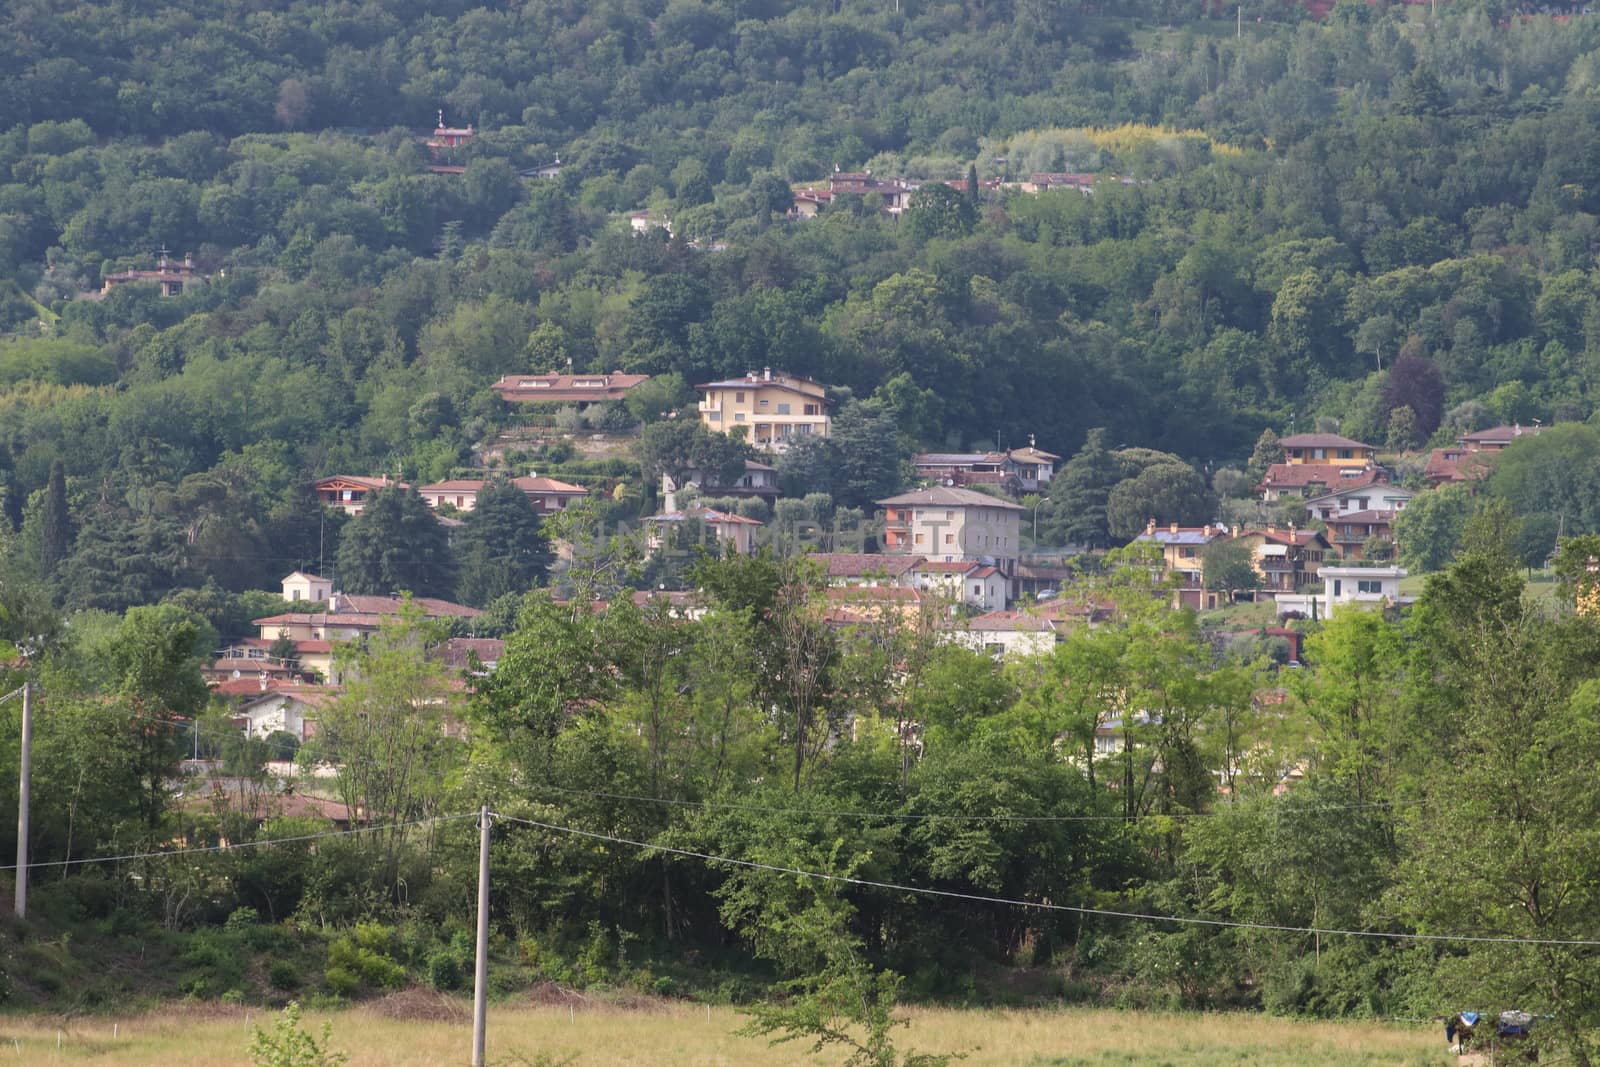 view of Brescia, a city in northern Italy from the mountain